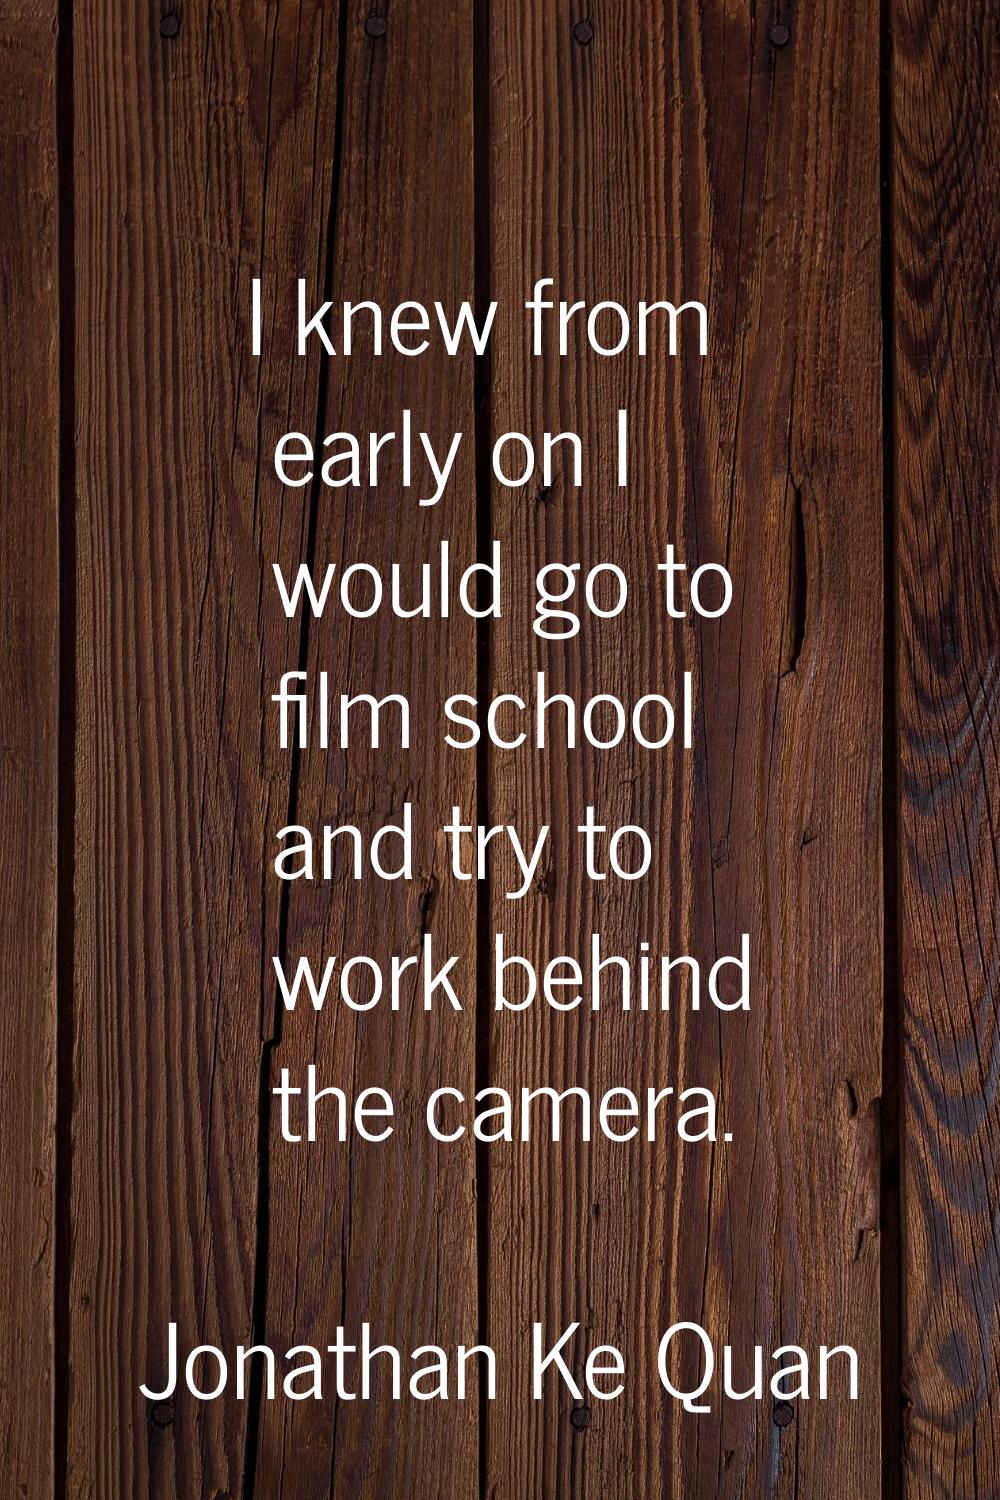 I knew from early on I would go to film school and try to work behind the camera.